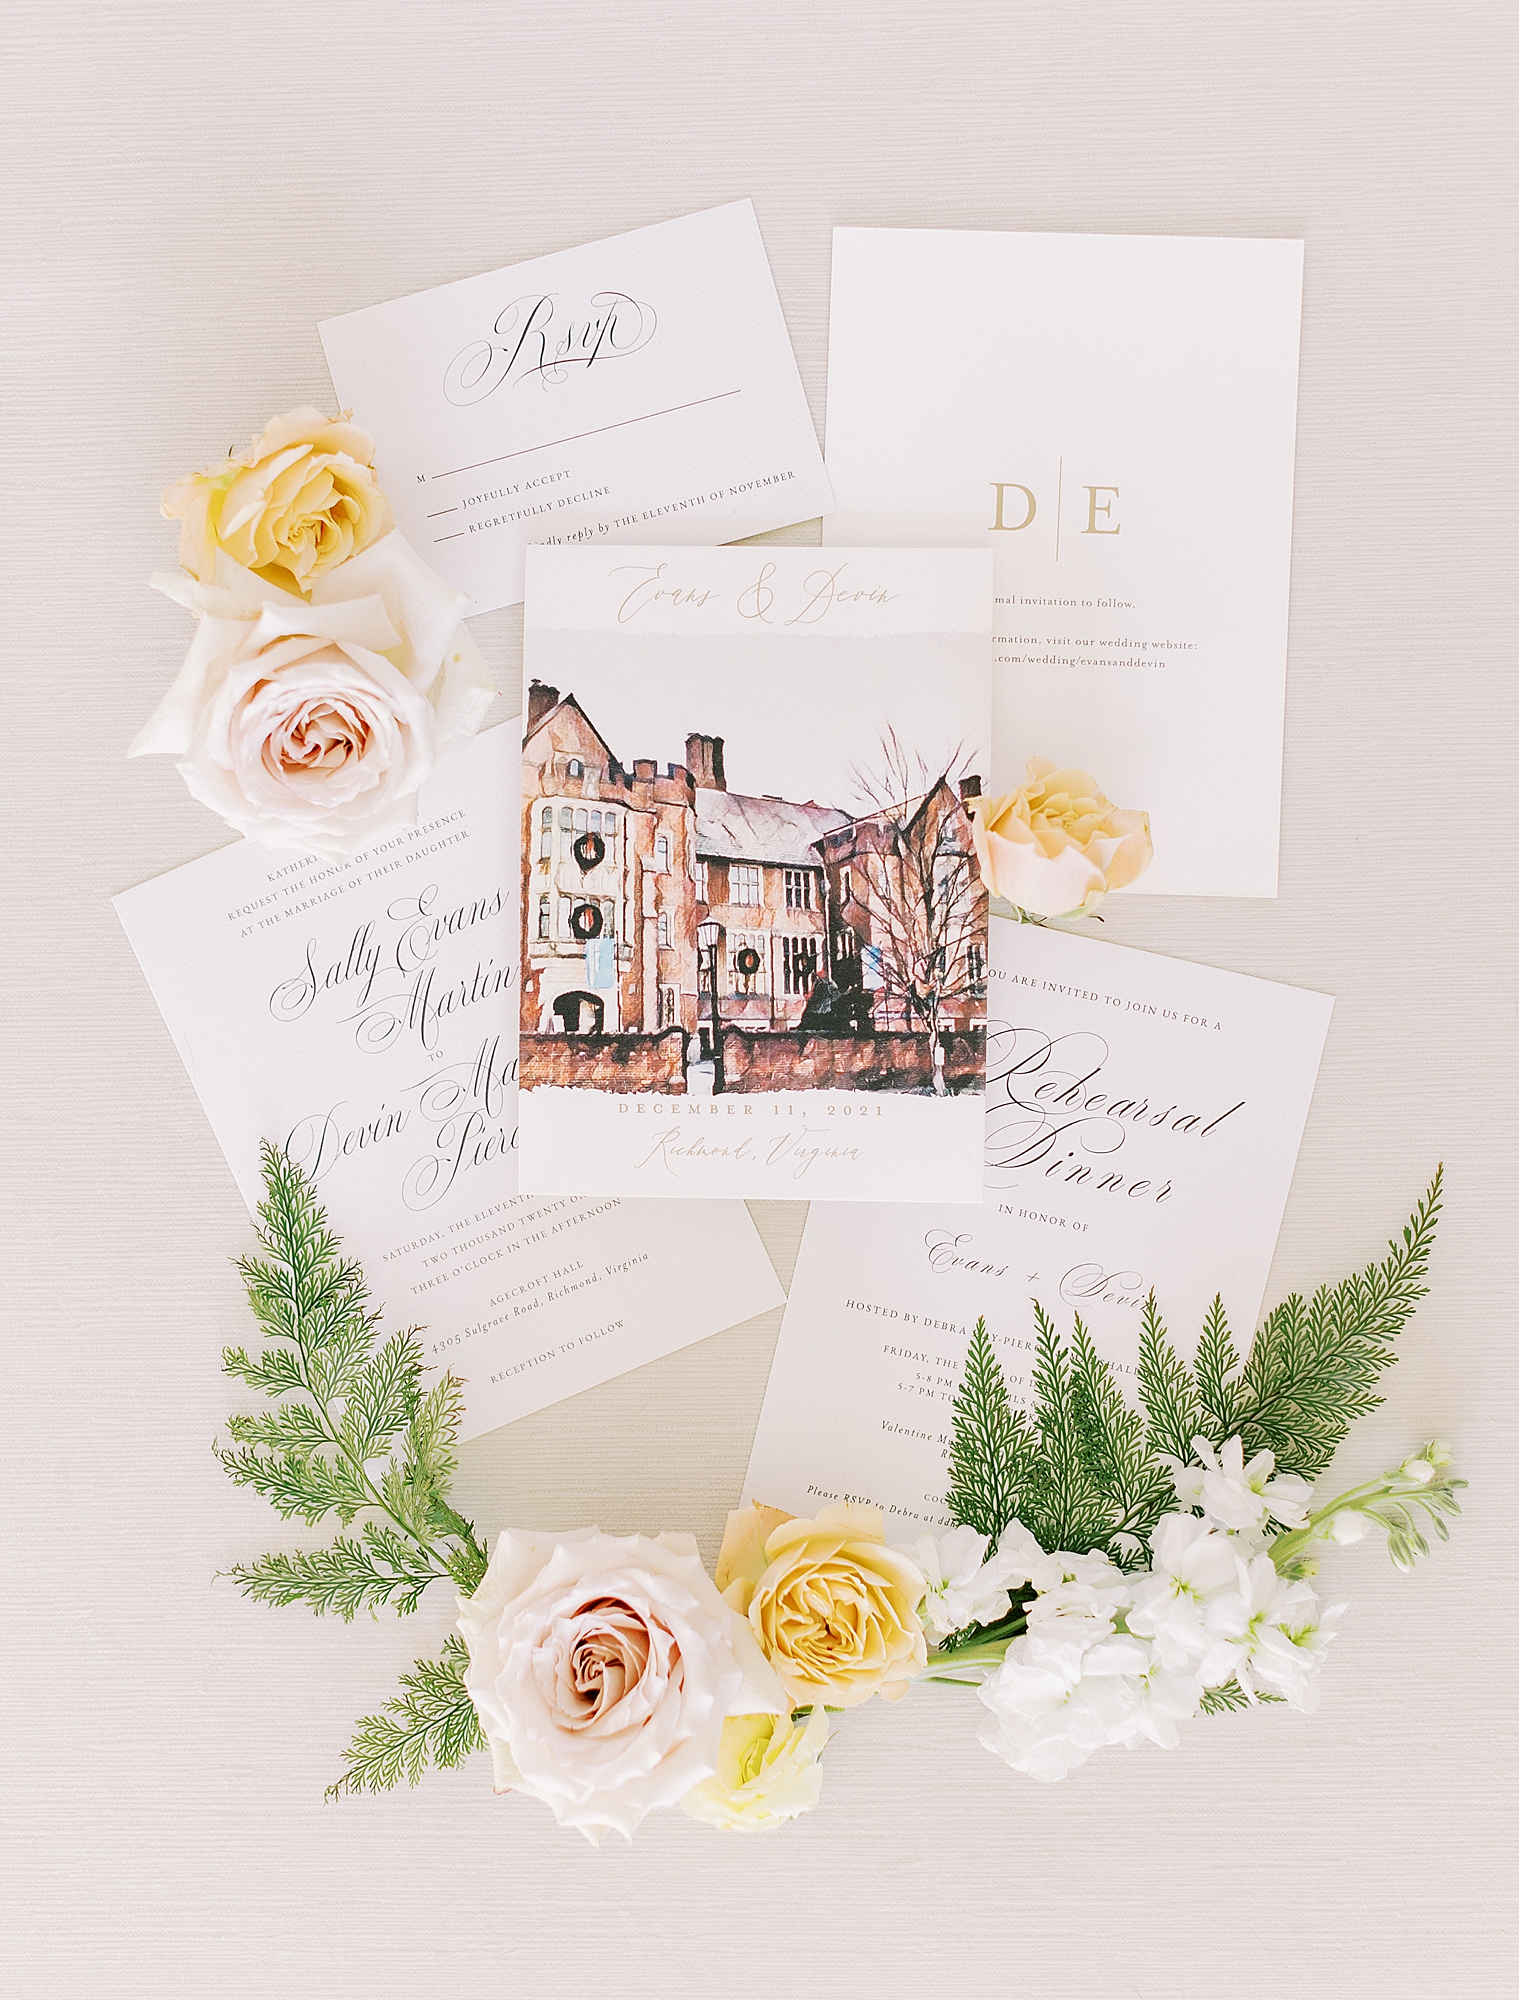 Invitation suite by The Knot.